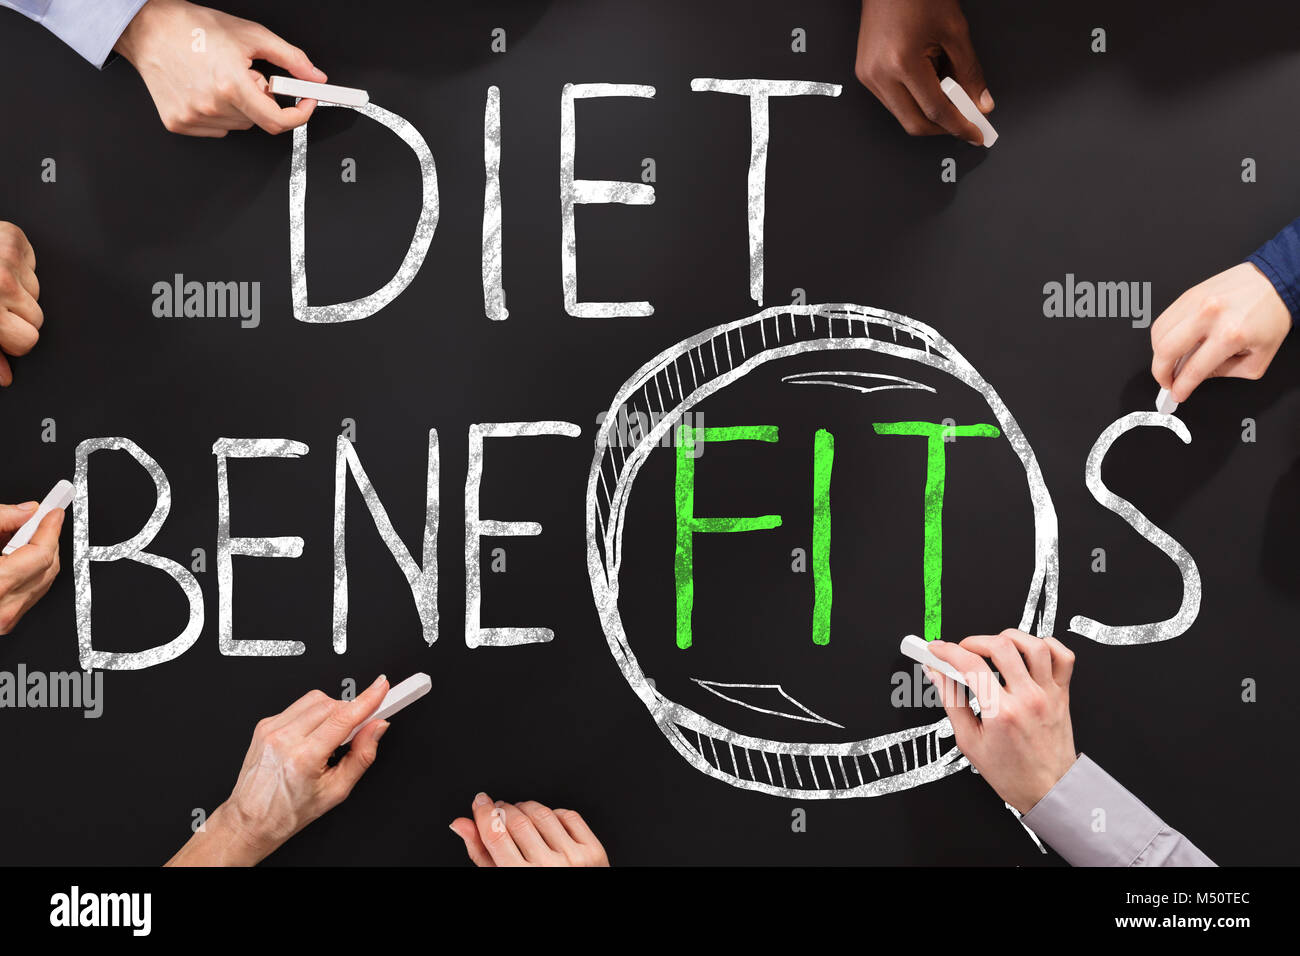 People Drawing Diet And Weight Loss Concept Stock Photo